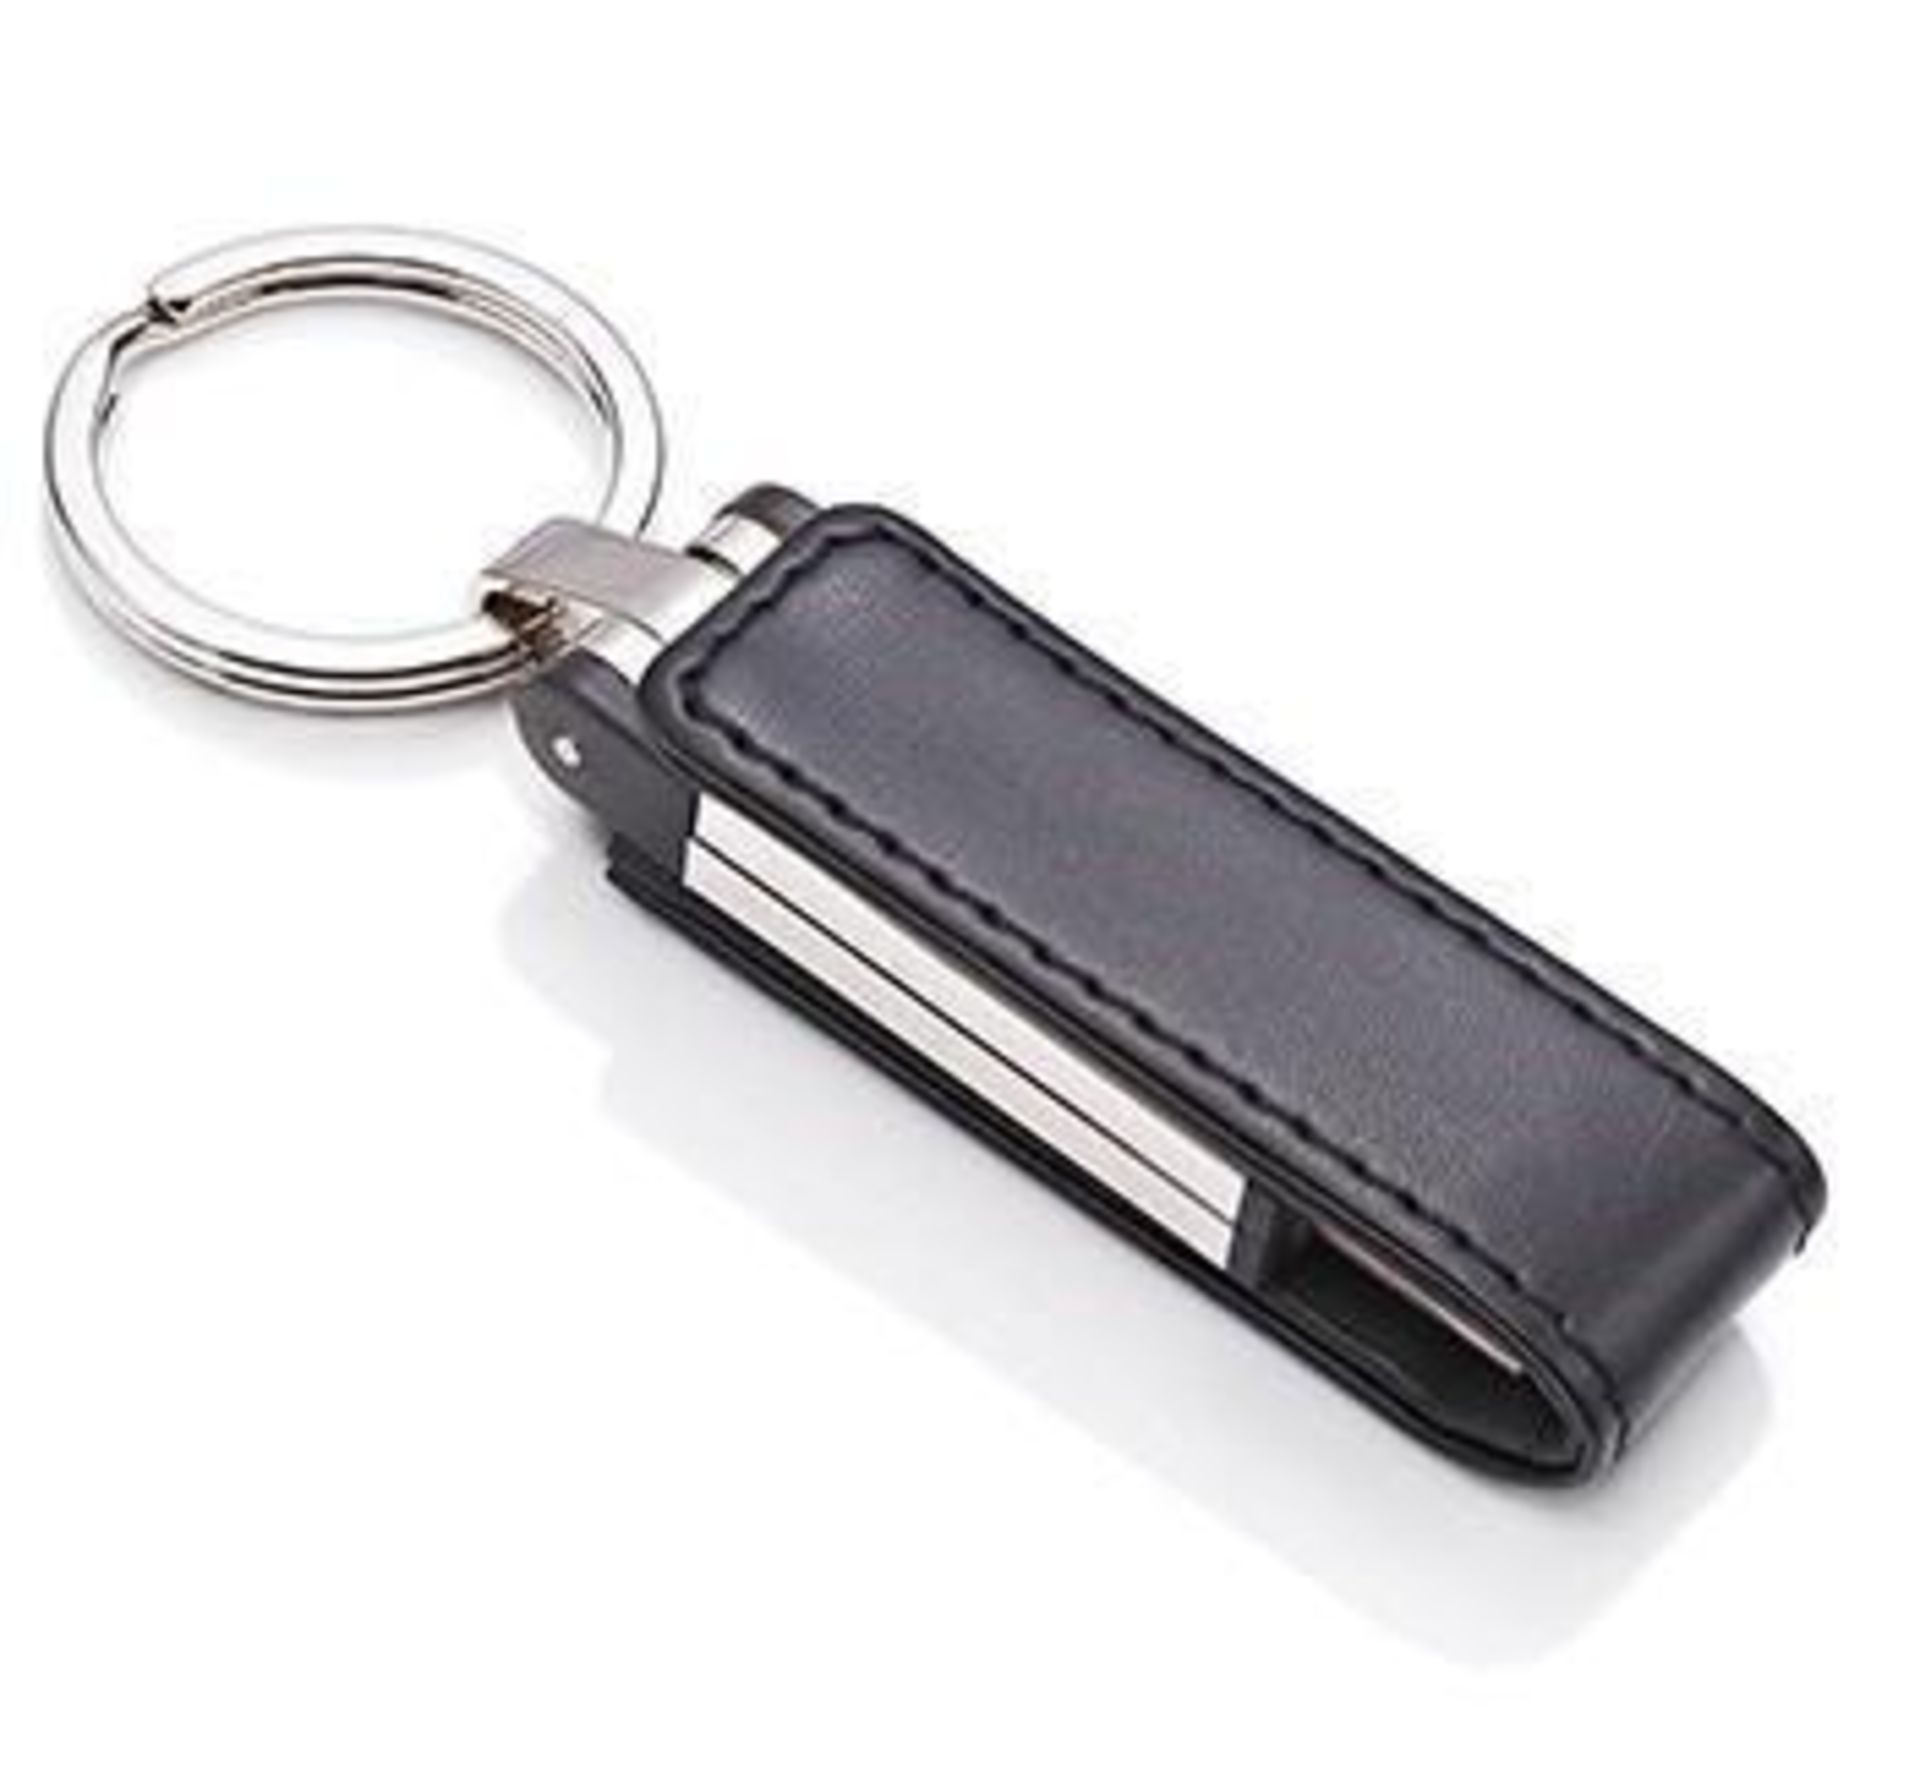 1 x ICE London Silver Plated 2GB USB Flashdrive Keyring - Features A Genuine Leather Wrap With Magne - Image 6 of 6